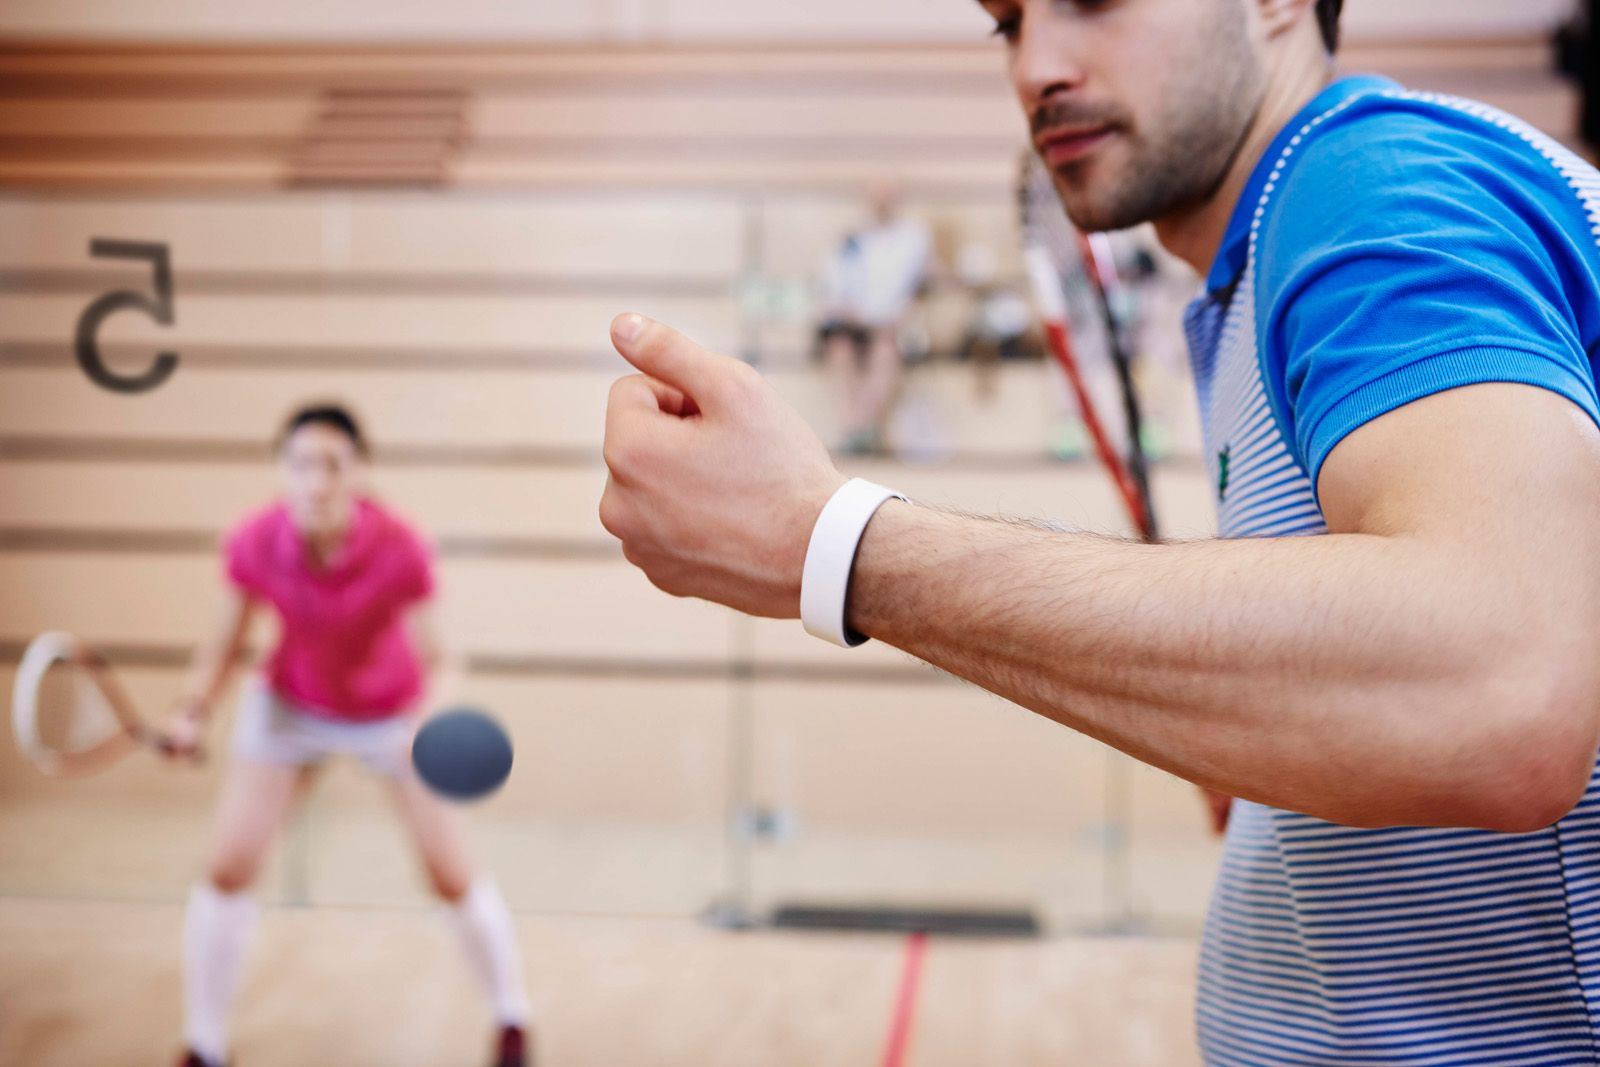 sony smartband 2 adds heart rate tracking to the mix image 1